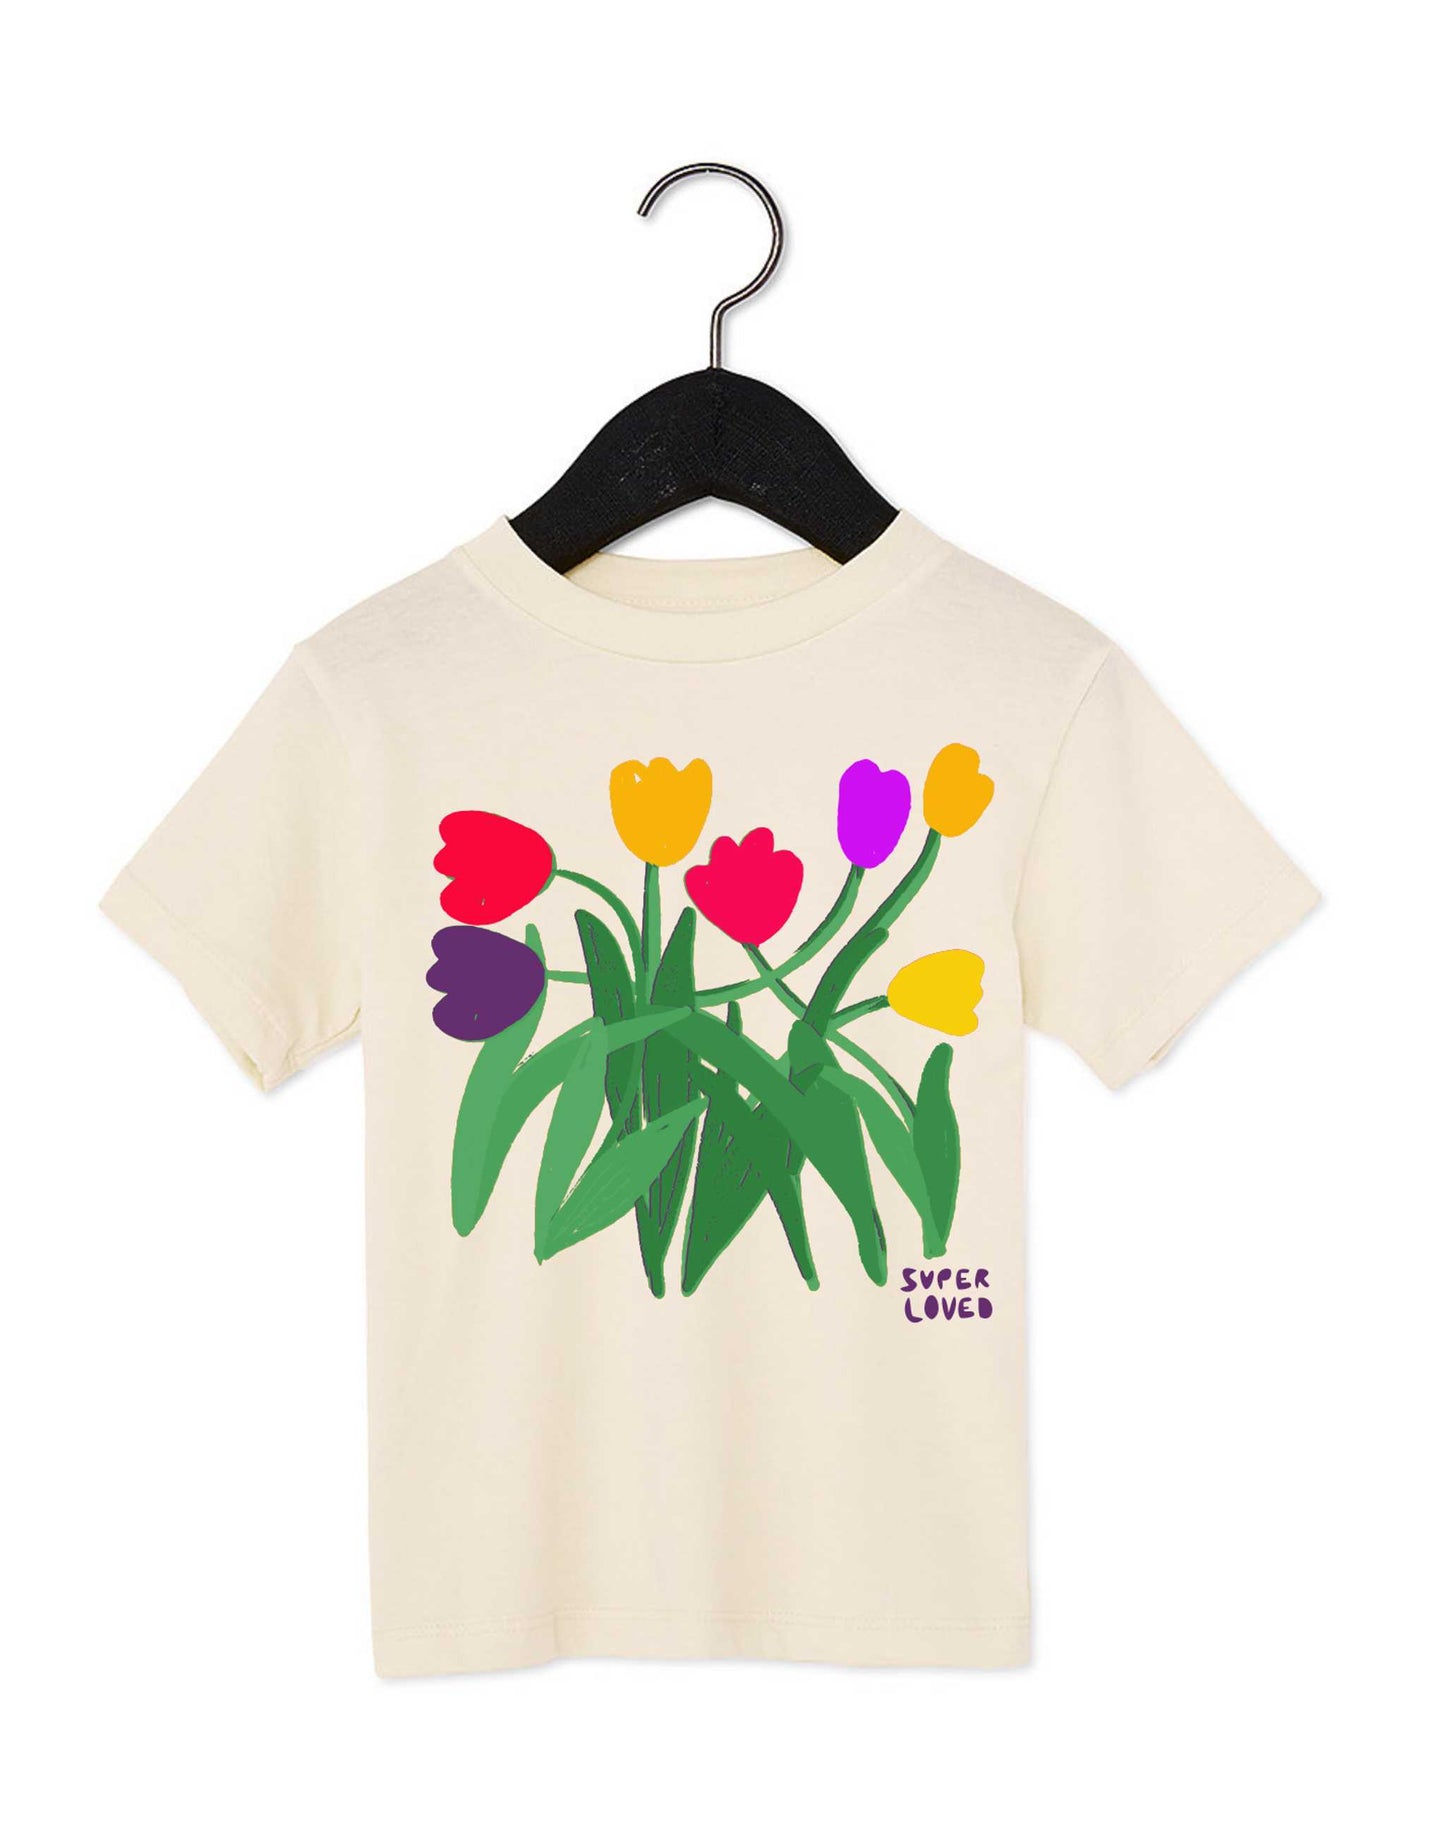 SUPER LOVED, Droopy Tulips Kids T-Shirt